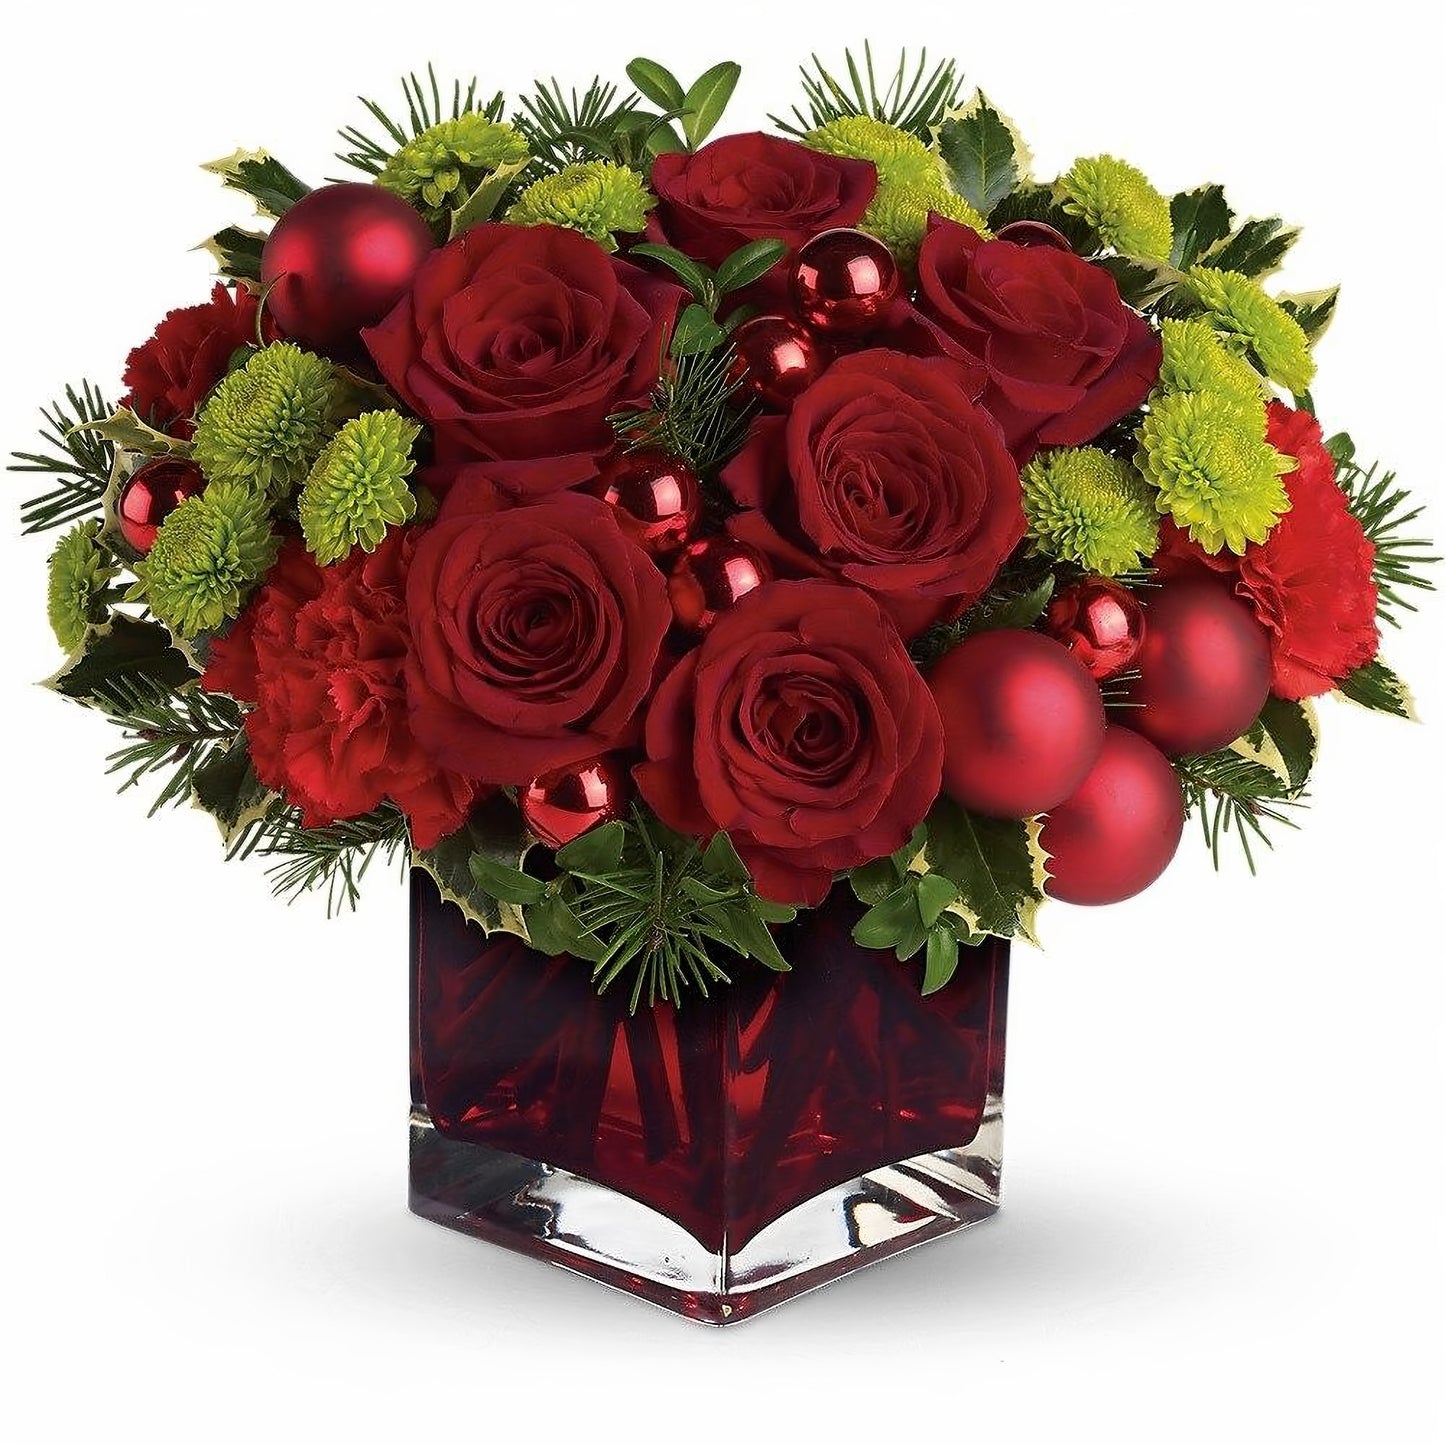 Baby It's Cold Outside - Floral Arrangement - Flower Delivery Brooklyn